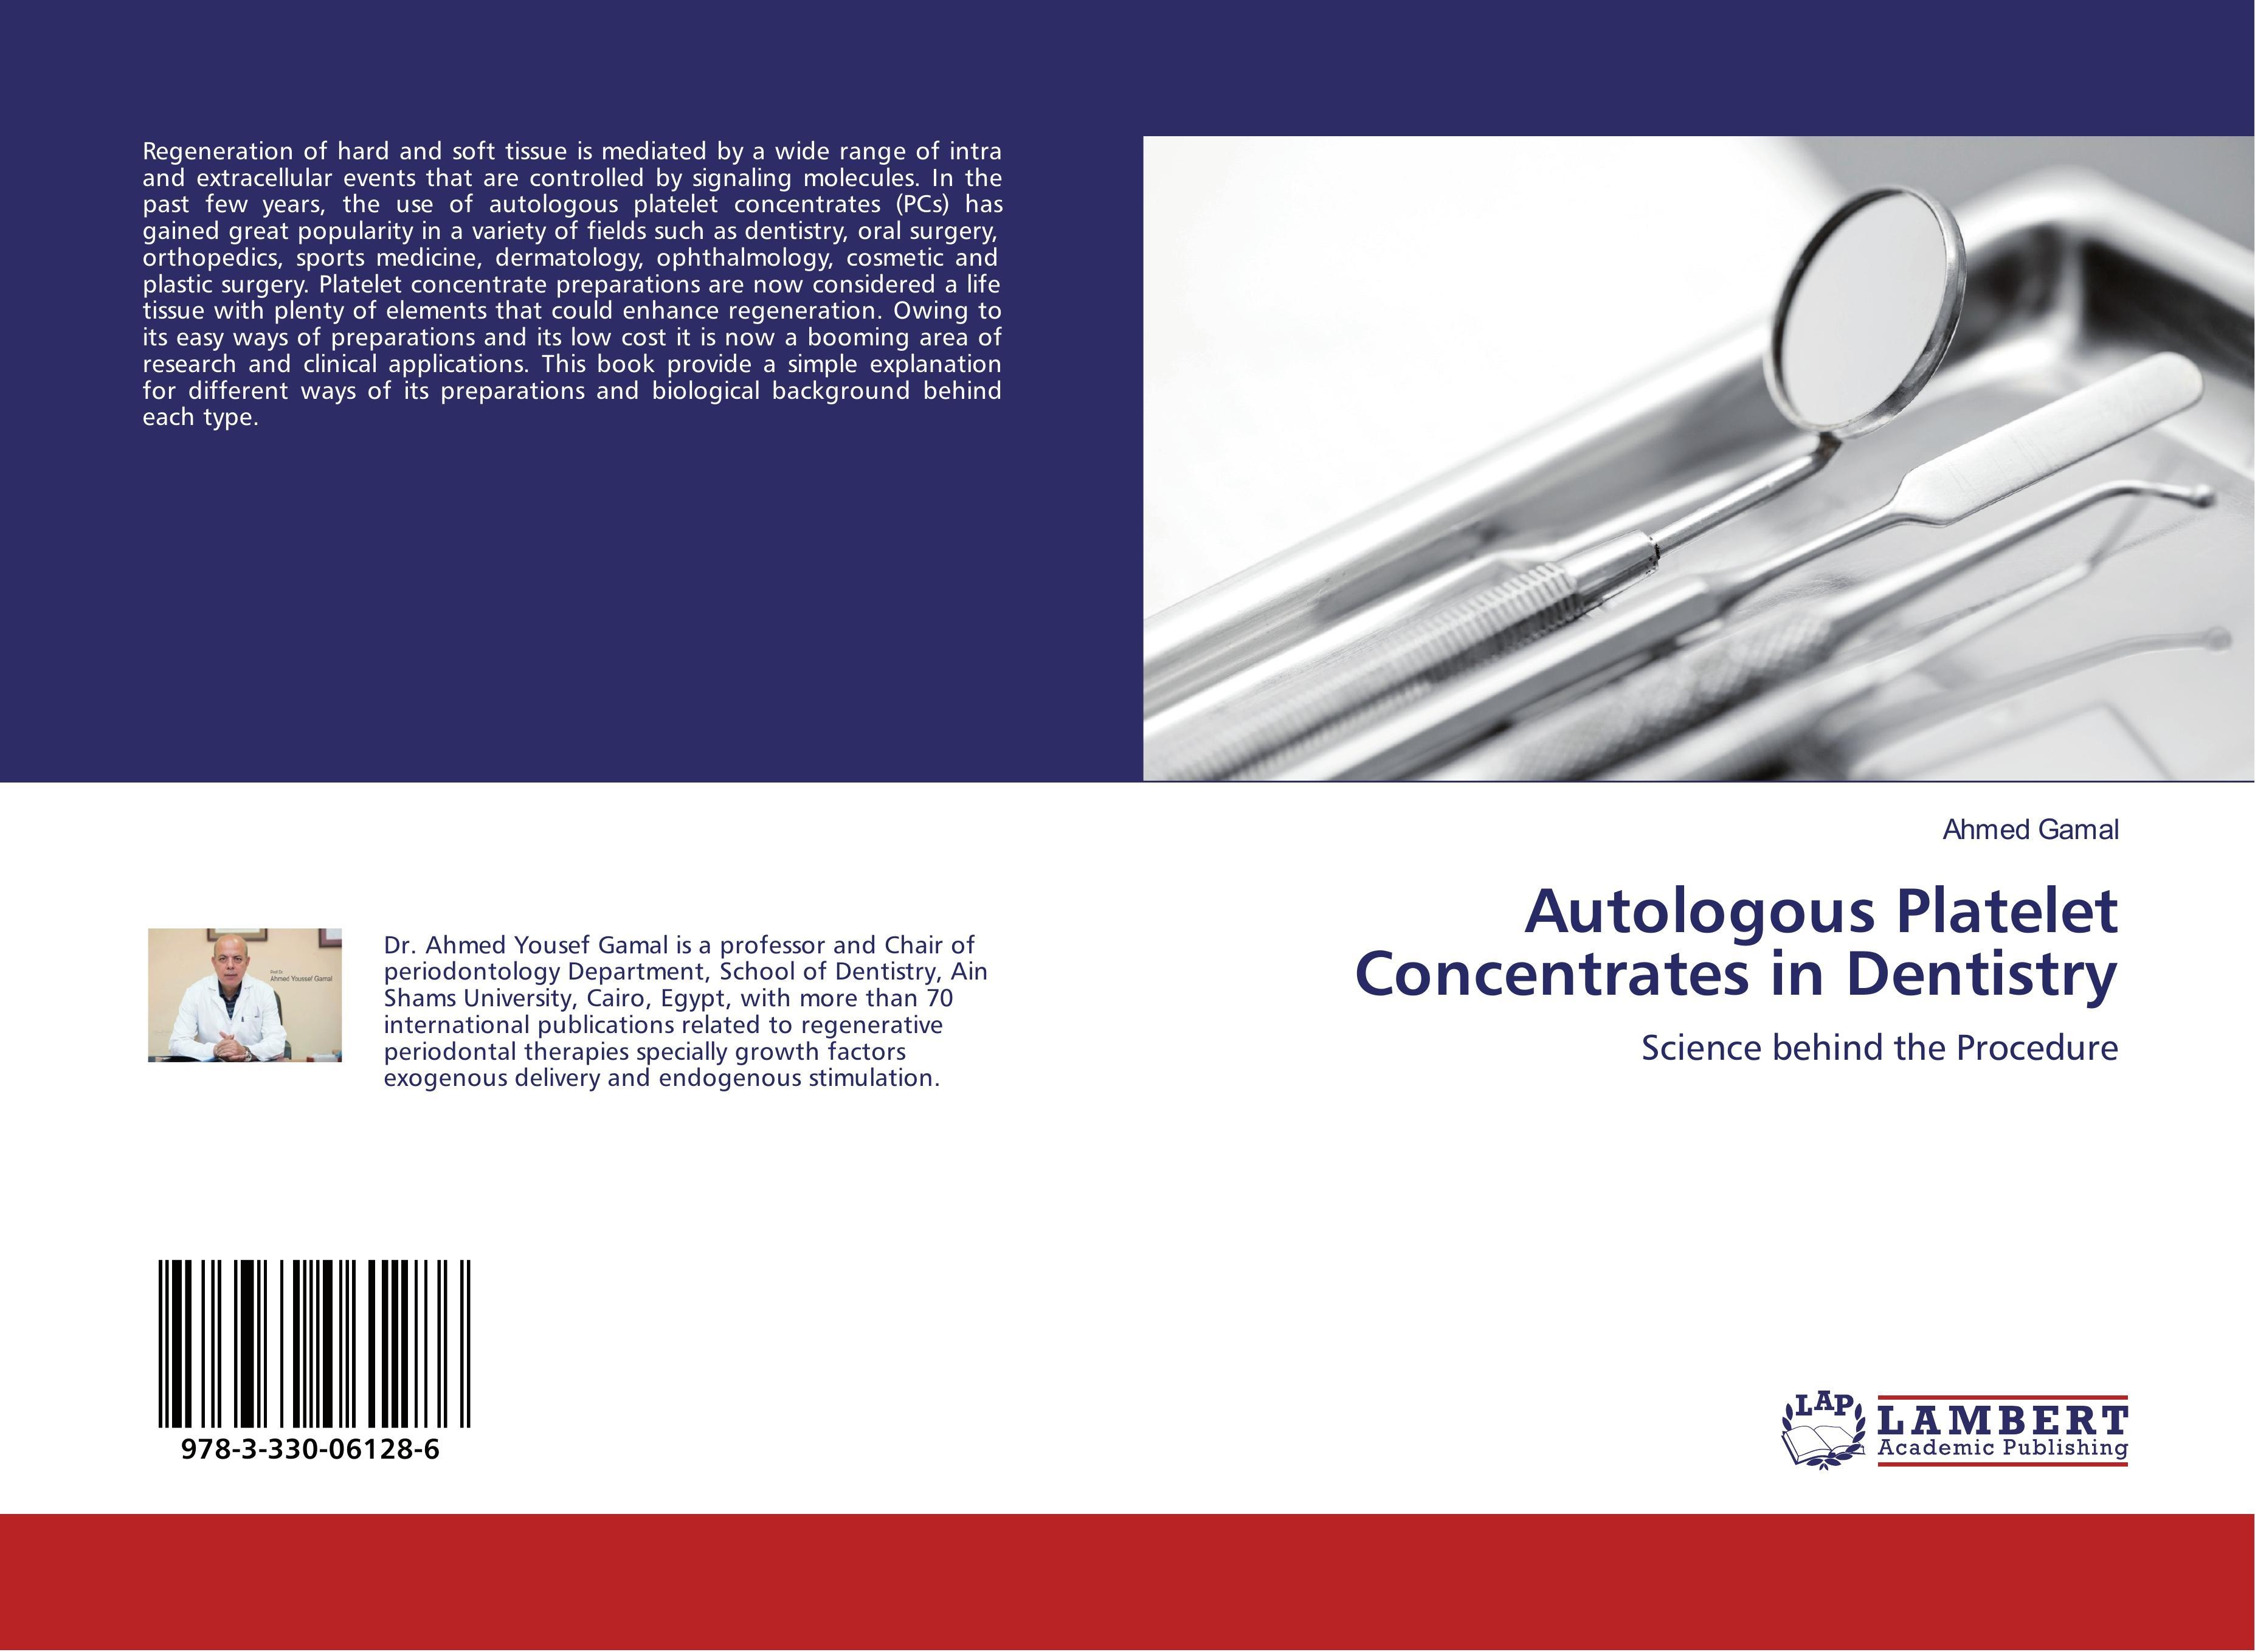 Autologous Platelet Concentrates in Dentistry Ahmed Gamal - Picture 1 of 1